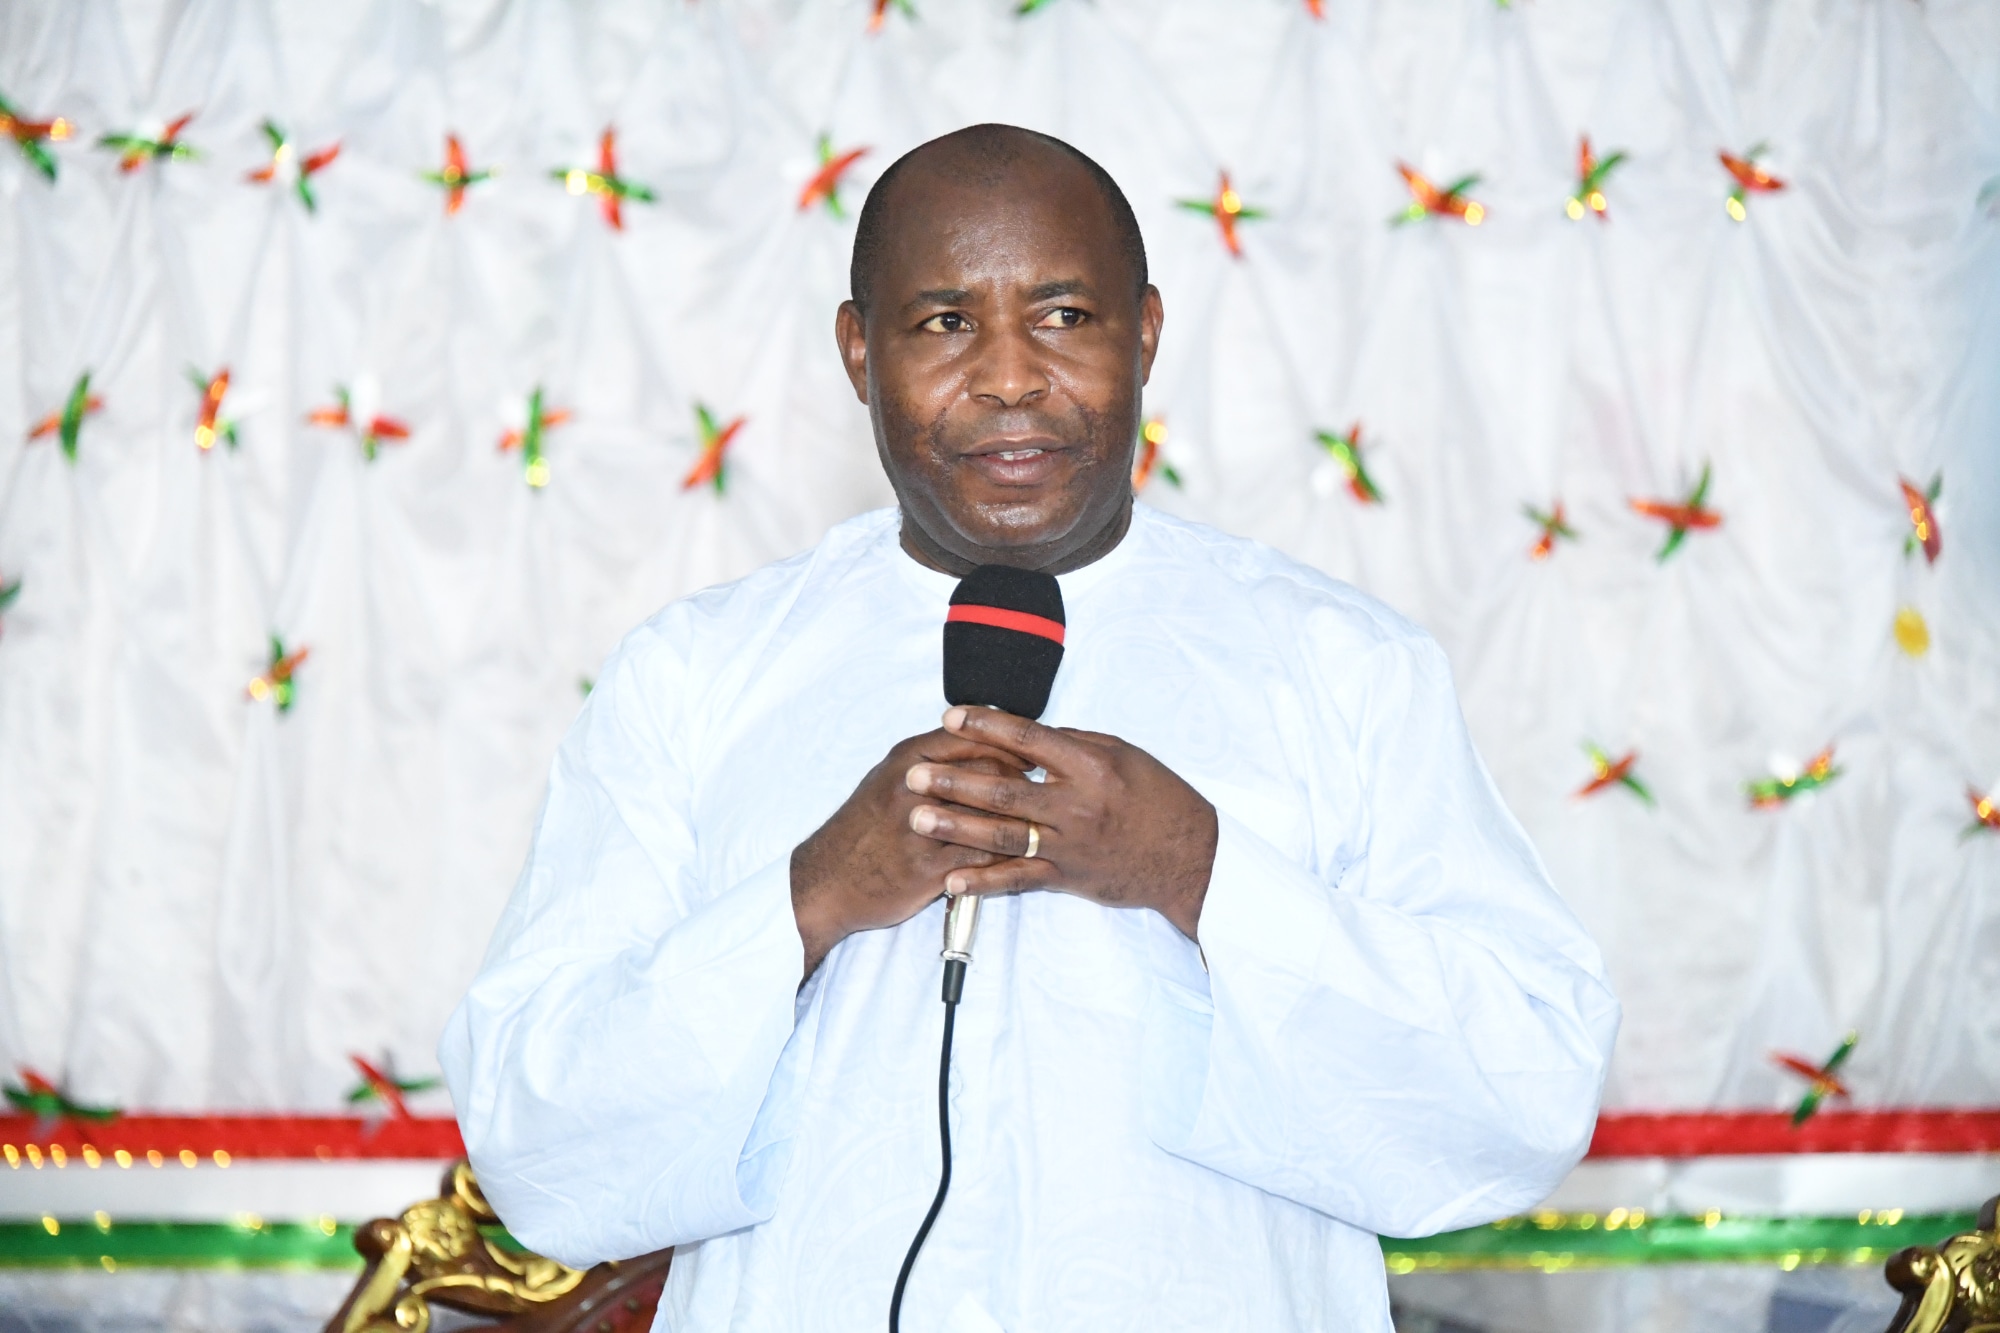 Christmas celebration: The Head of State calls on Burundians to strengthen love and unity